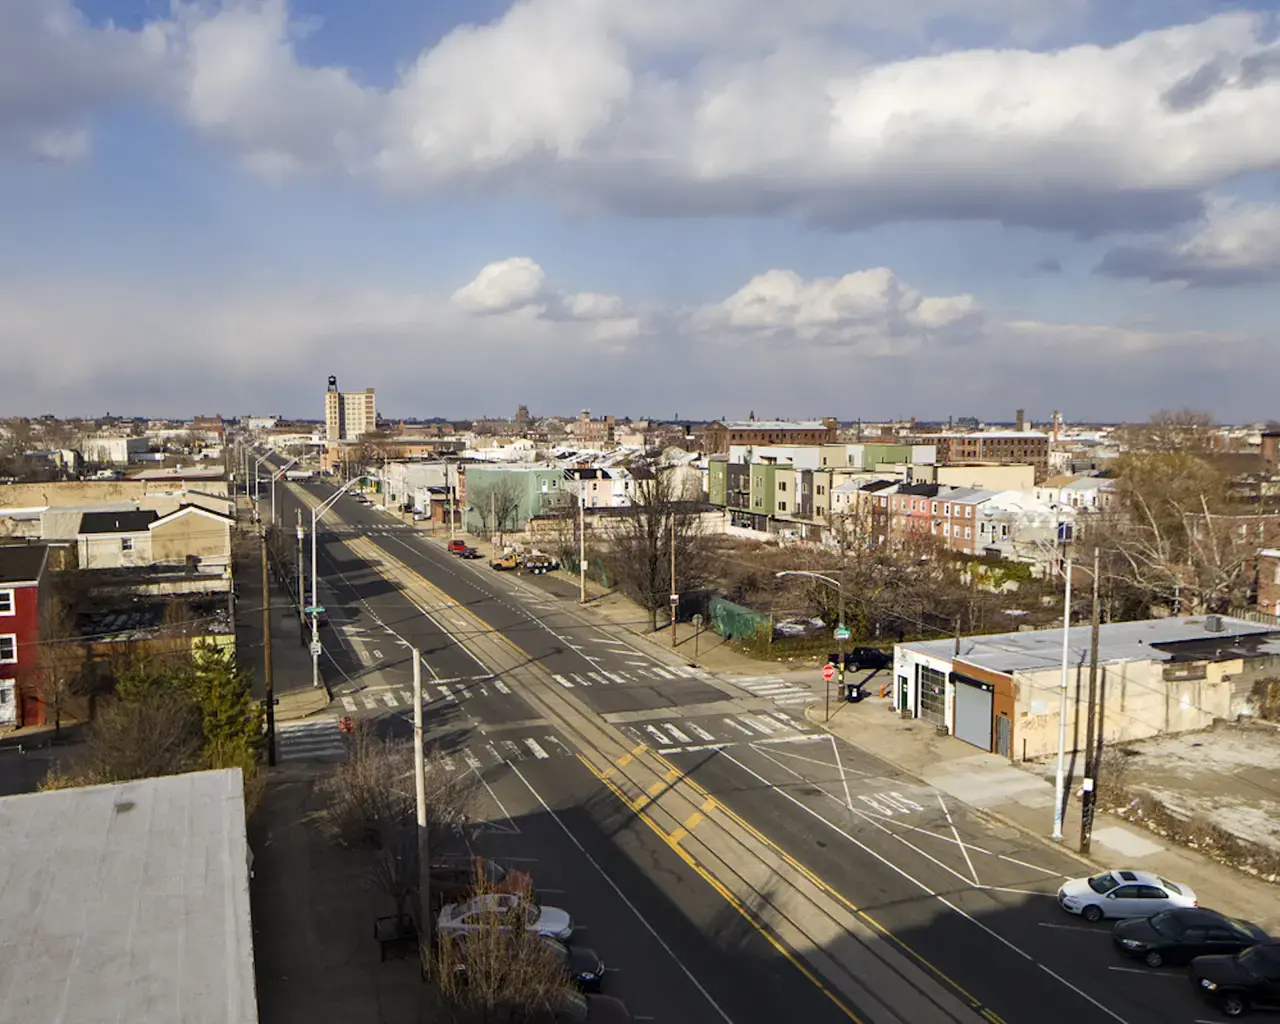 A view of the South Kensington neighborhood in Philadelphia. Photo by of Peter Woodall for Hidden City Daily.